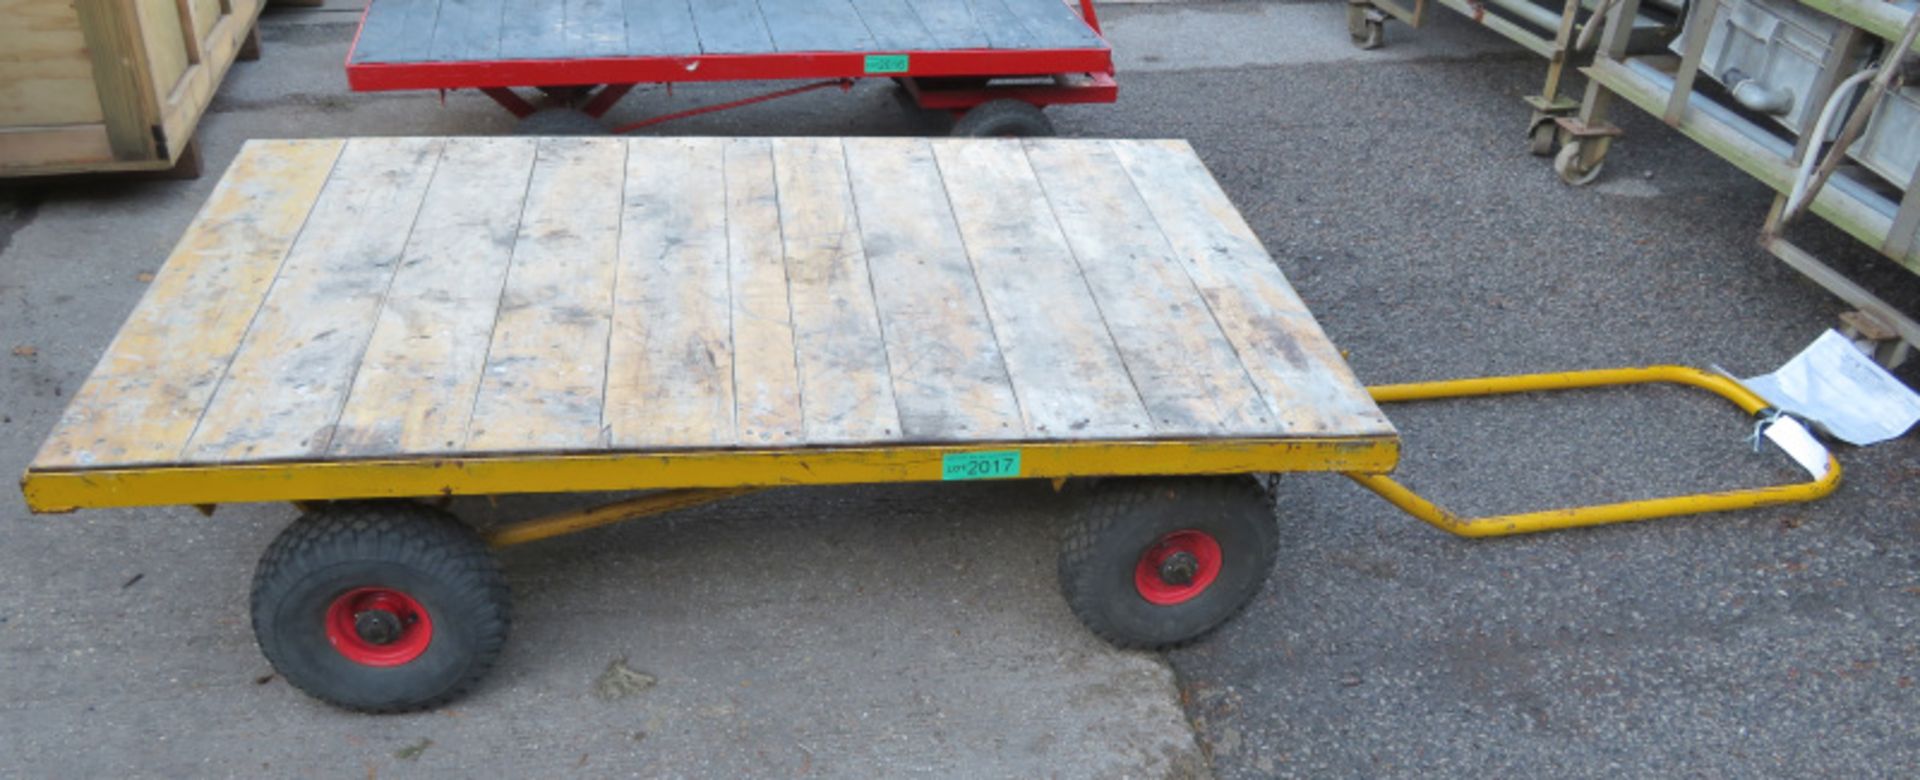 Flatbed Truck Trolley - L1700 x D915mm (Overall dimensions with handle)